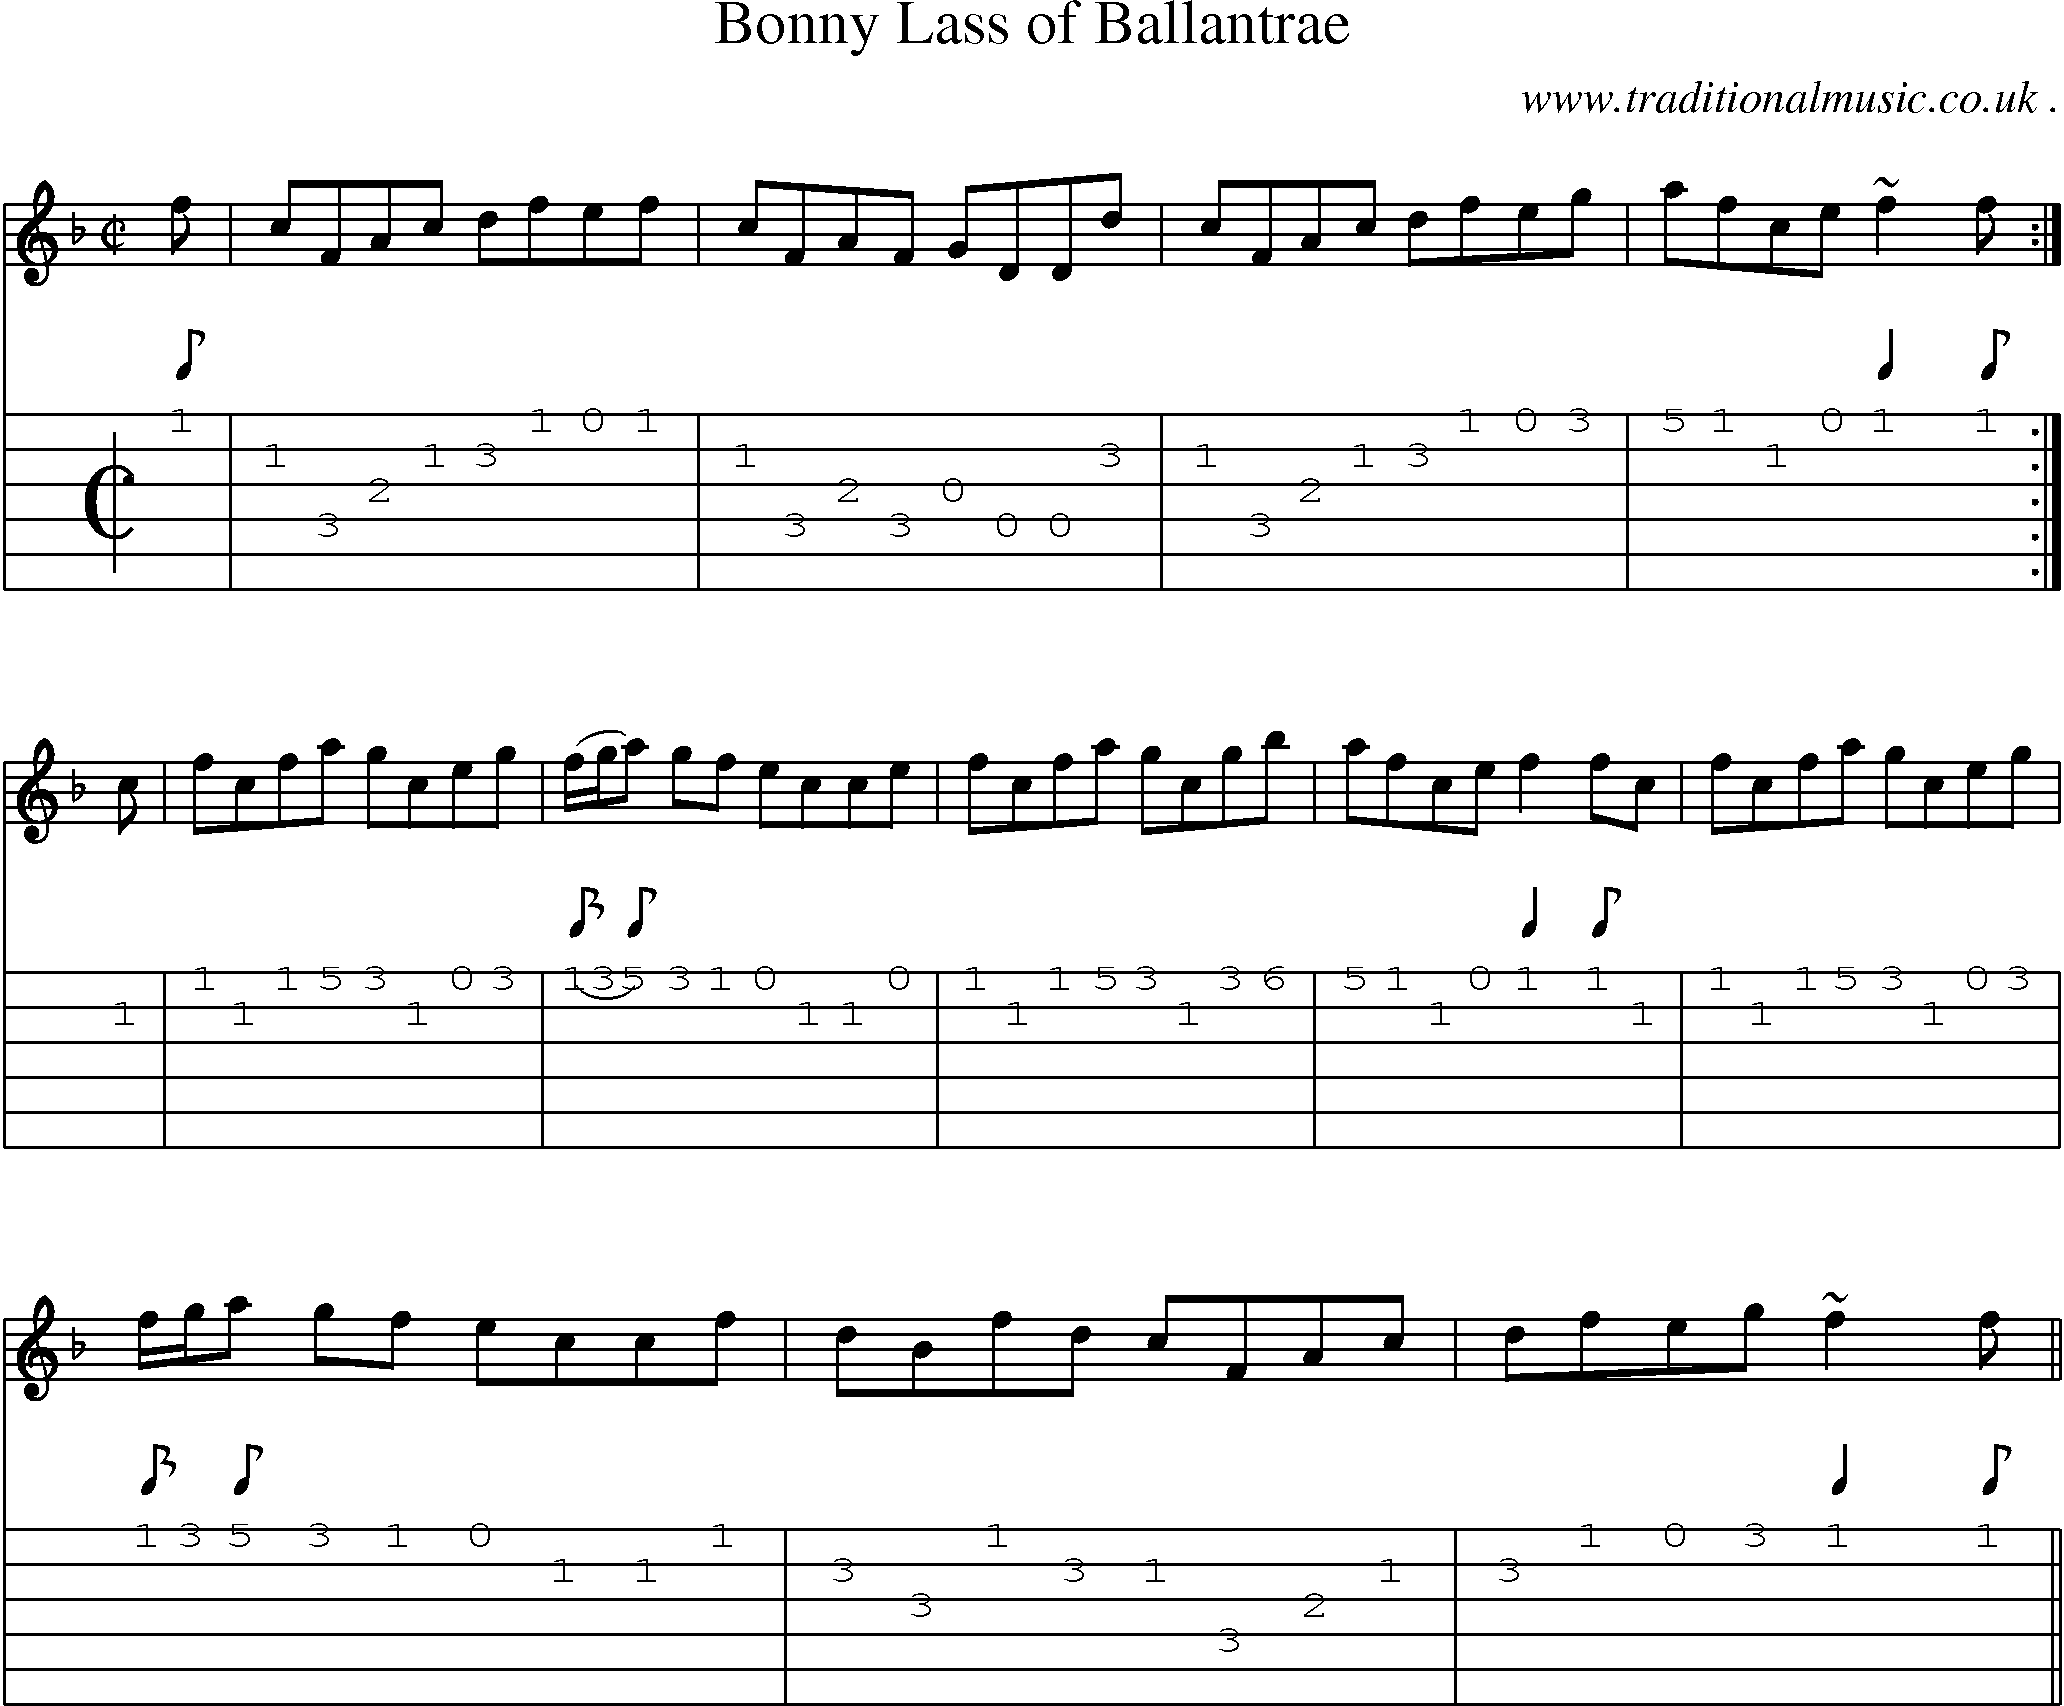 Sheet-music  score, Chords and Guitar Tabs for Bonny Lass Of Ballantrae